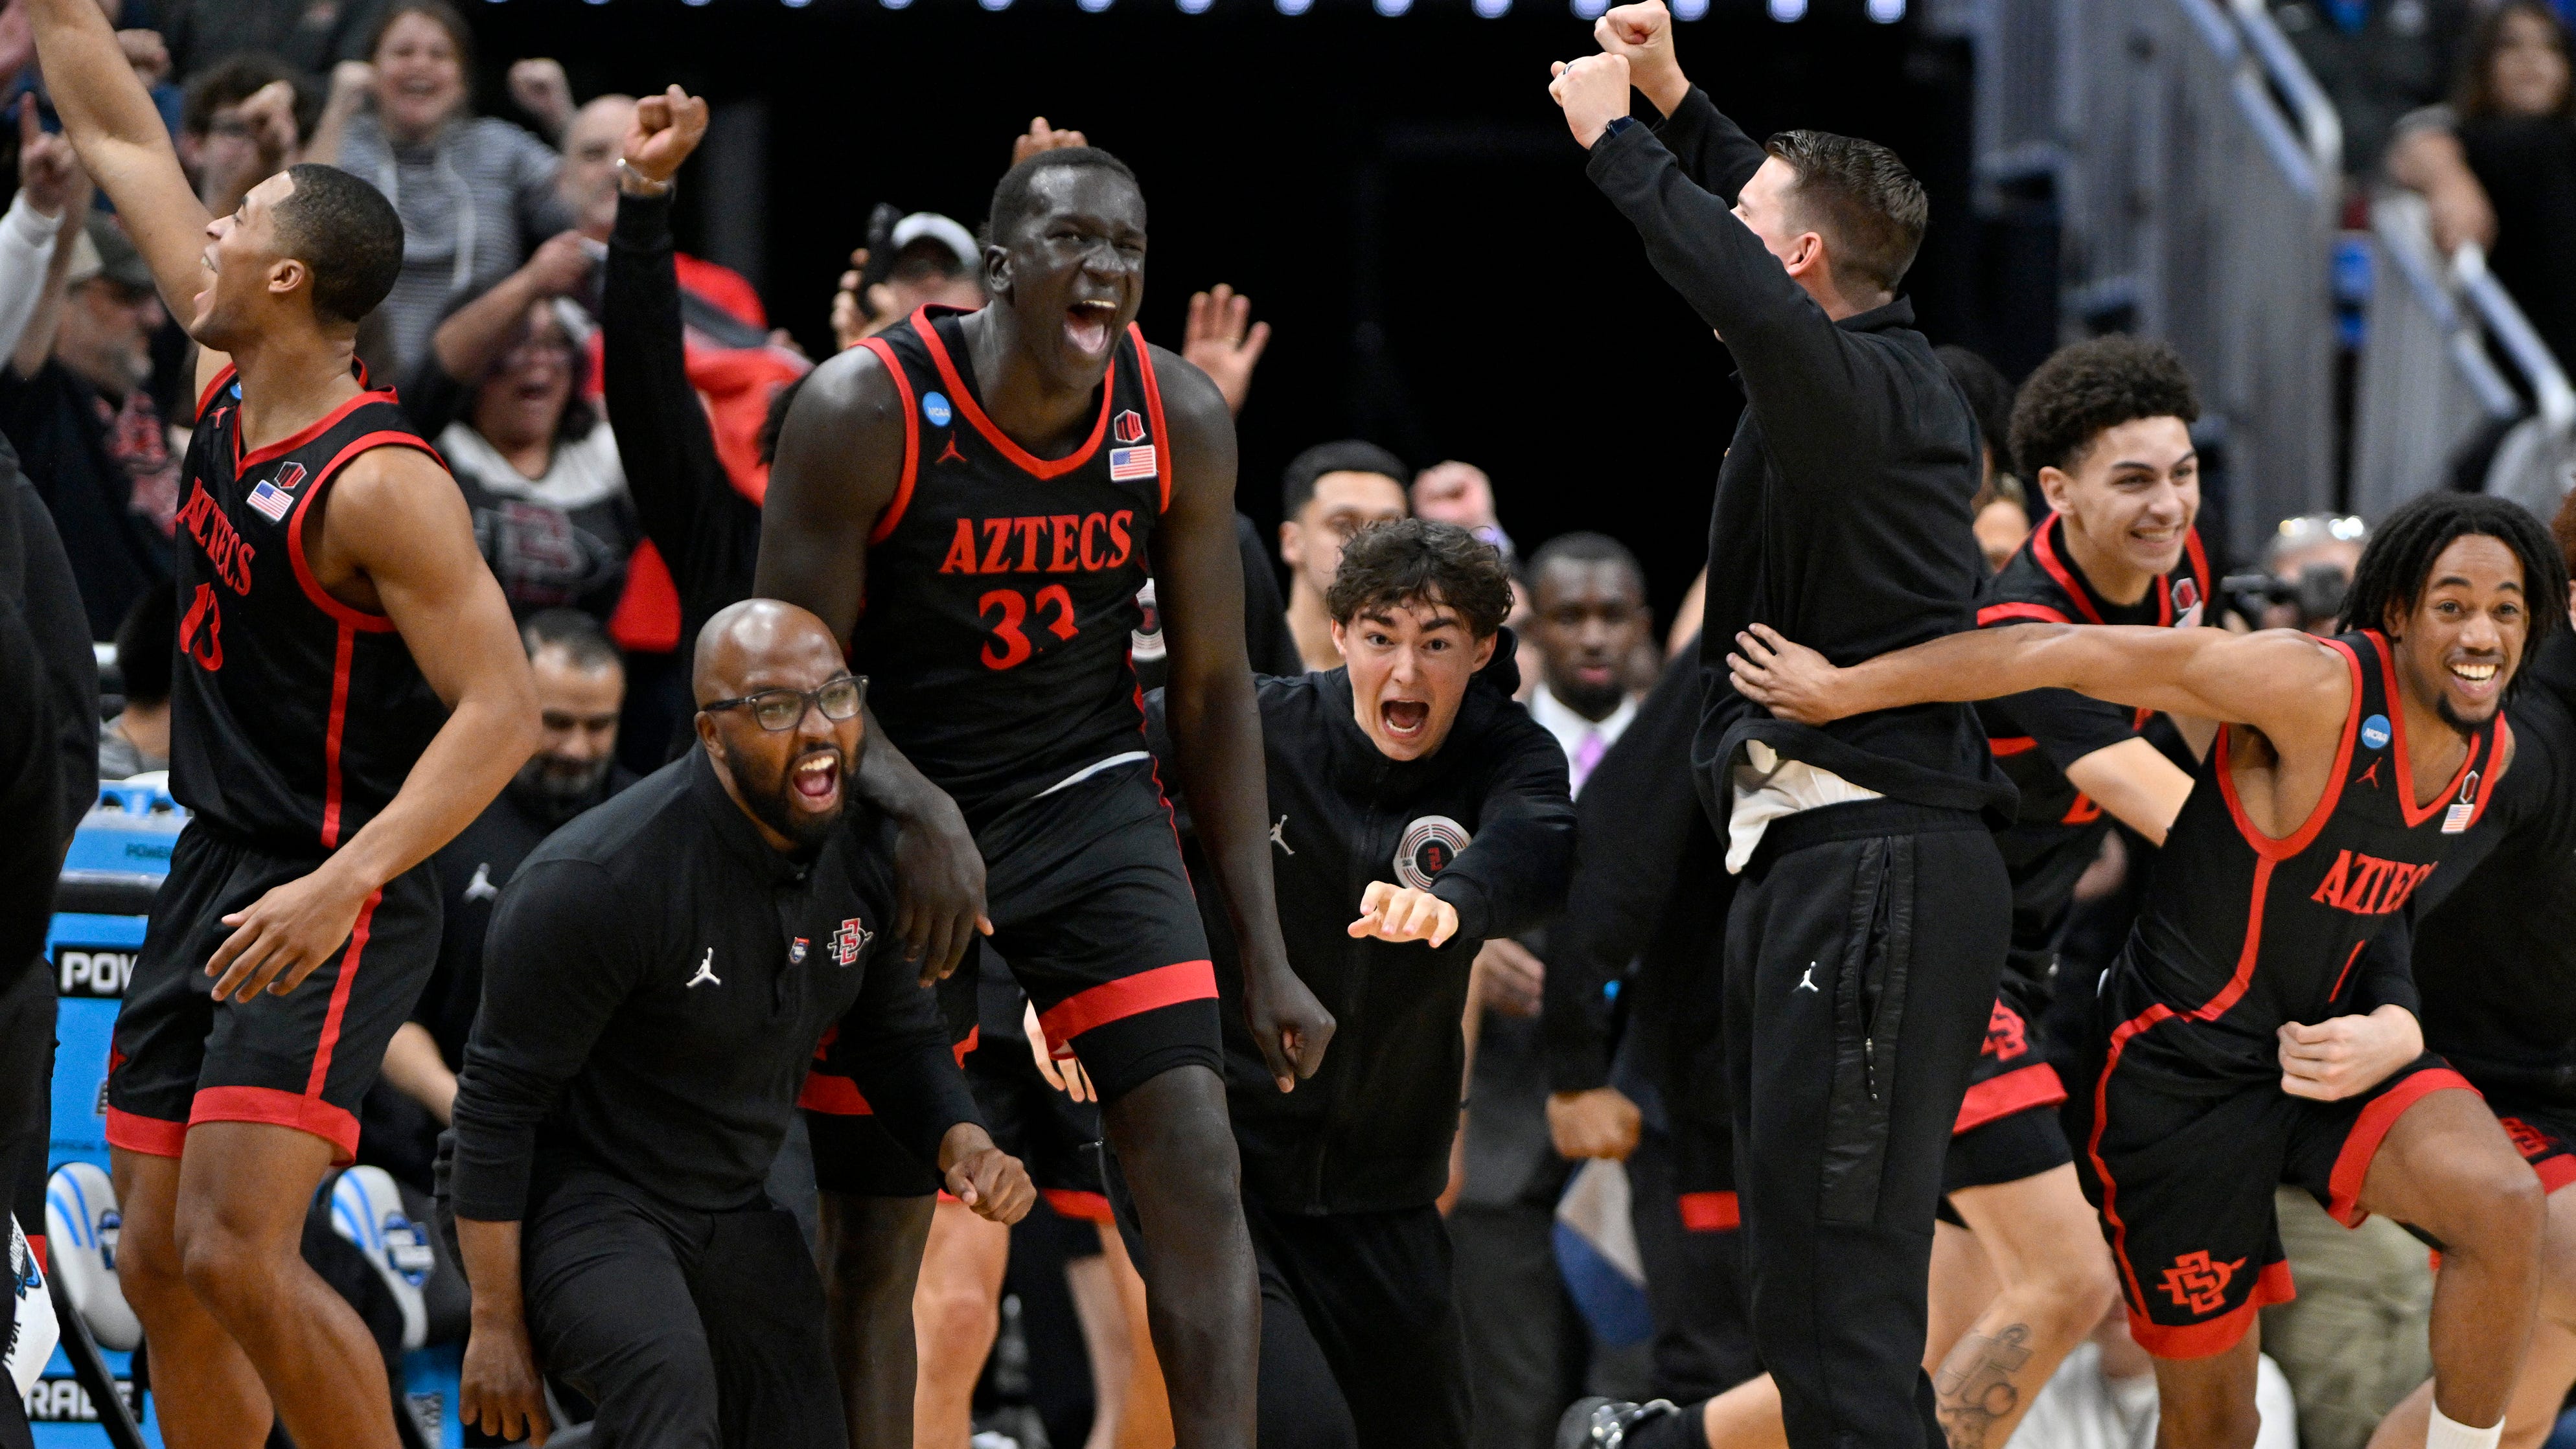 San Diego State players celebrate after defeating Alabama in the Sweet 16.